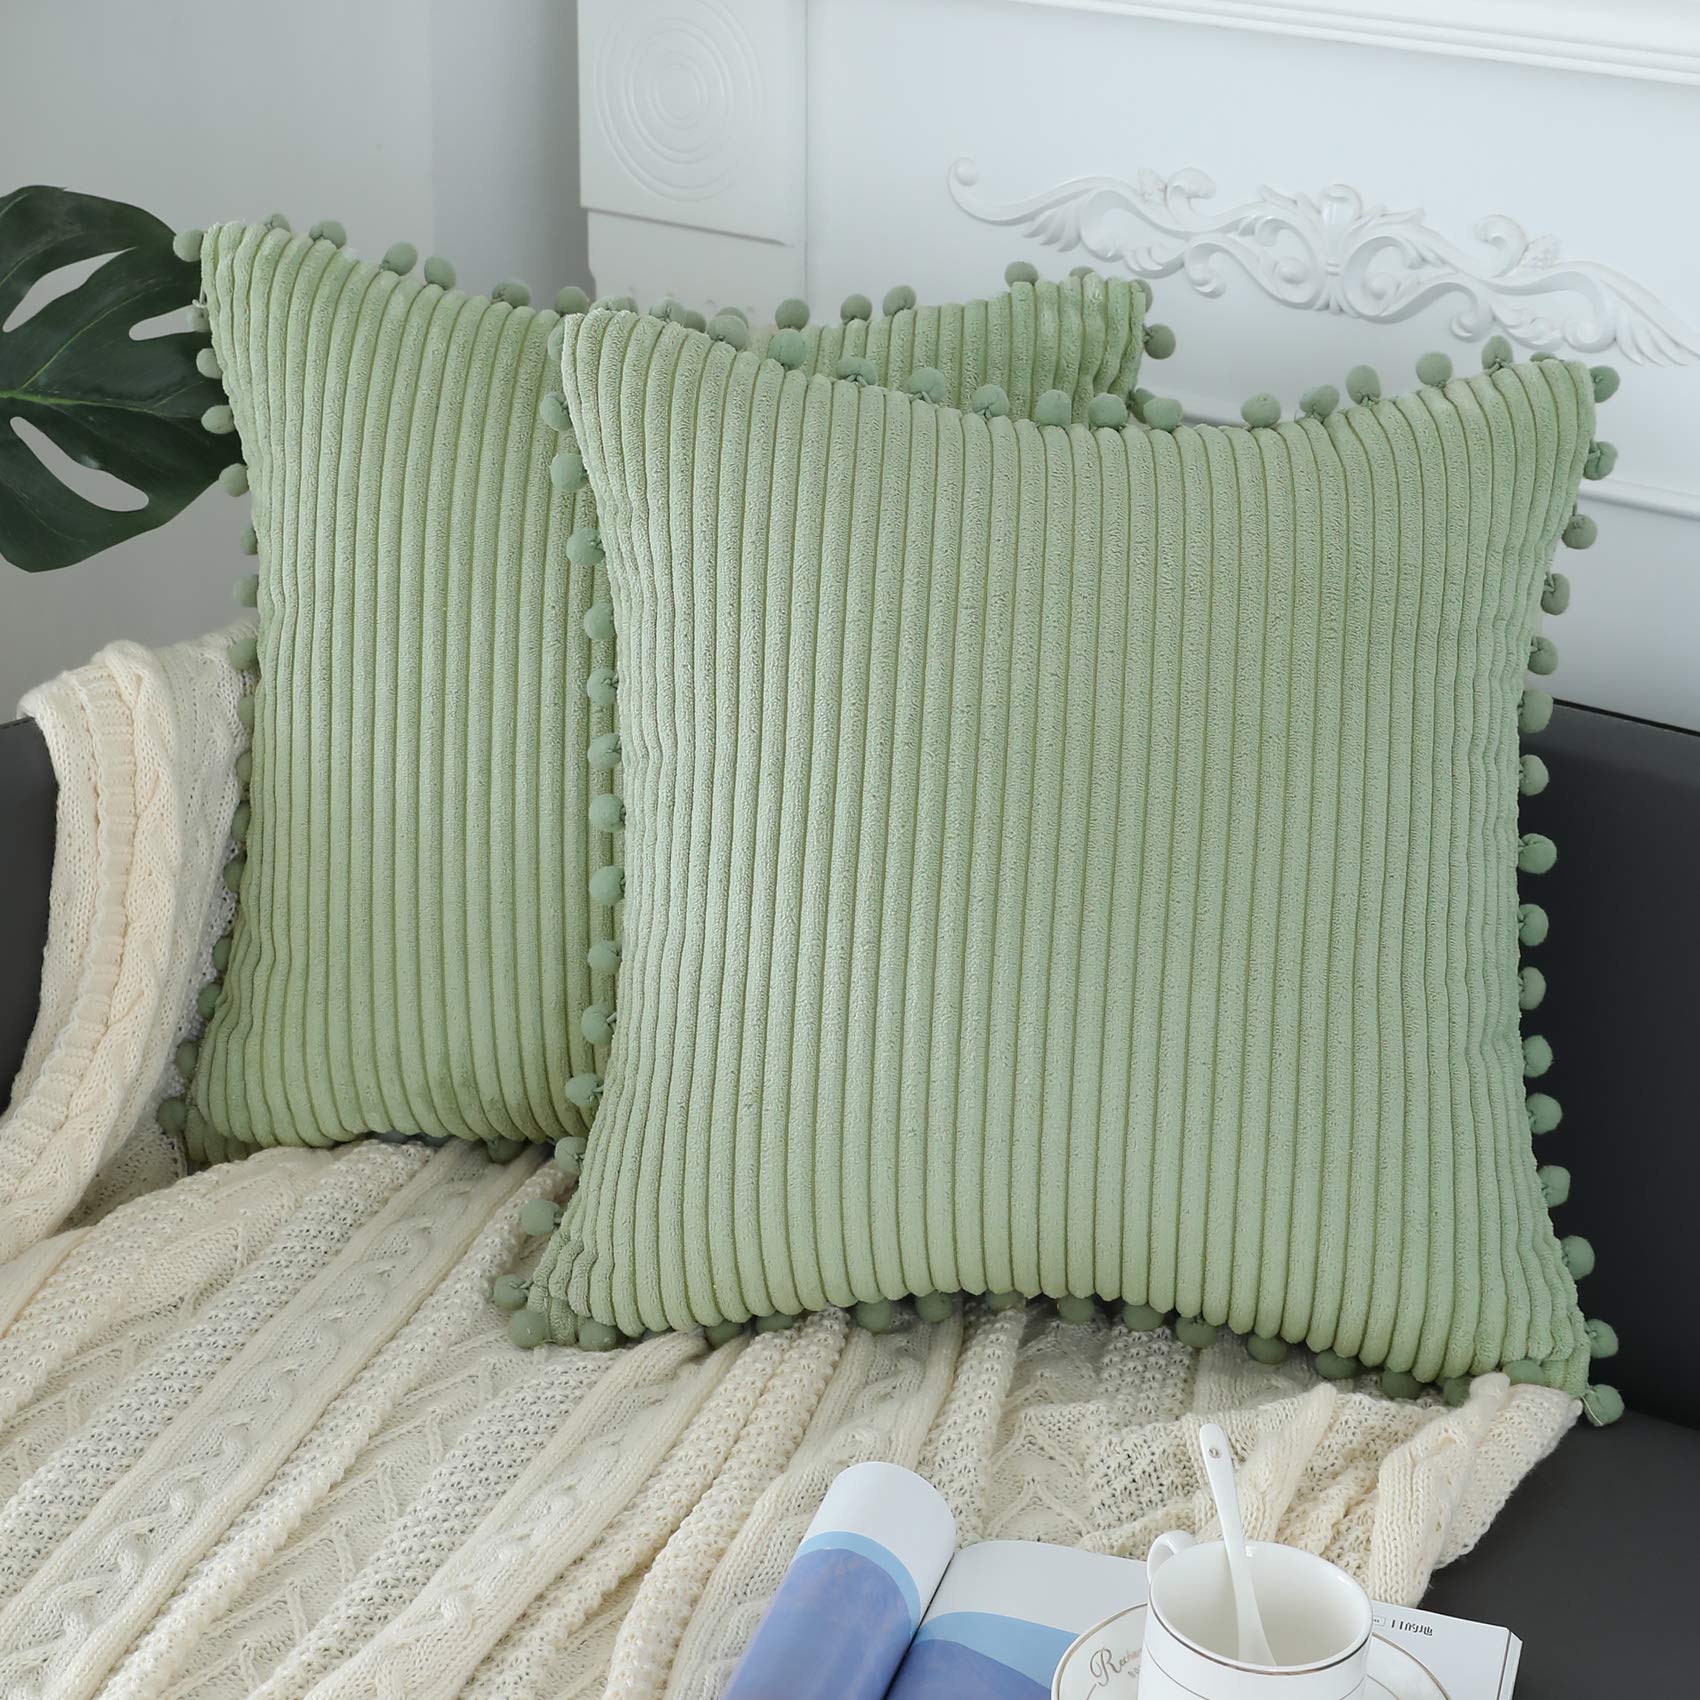 sykting Sage Green Throw Pillow Covers 20x20 inch Soft Striped Boho Farmhouse Decorative Pillow Covers with Pom Poms for Couch S